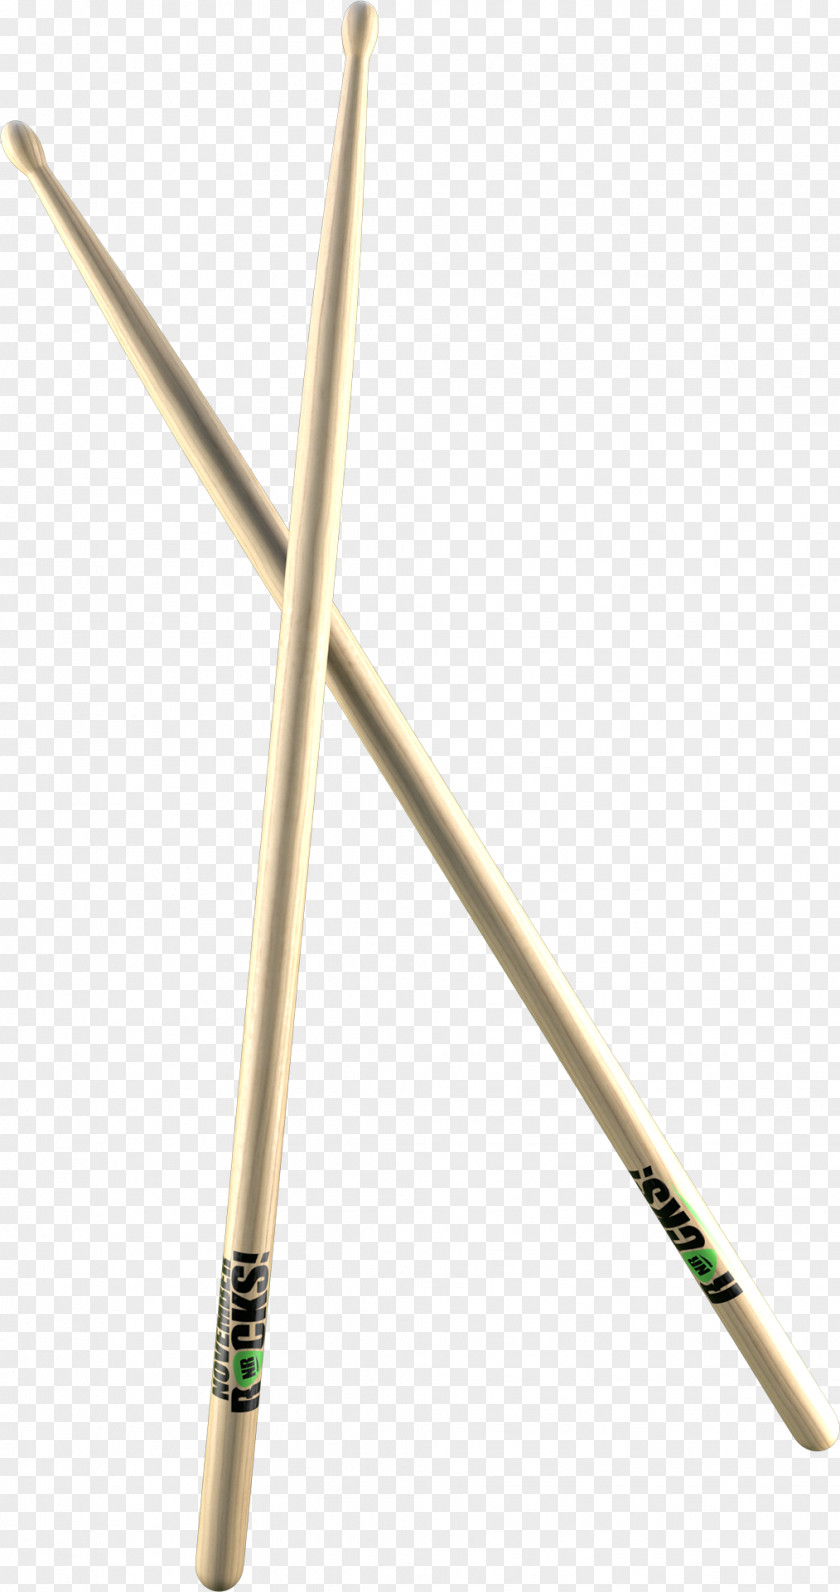 Drum Stick Cue Online Game NetEnt PNG